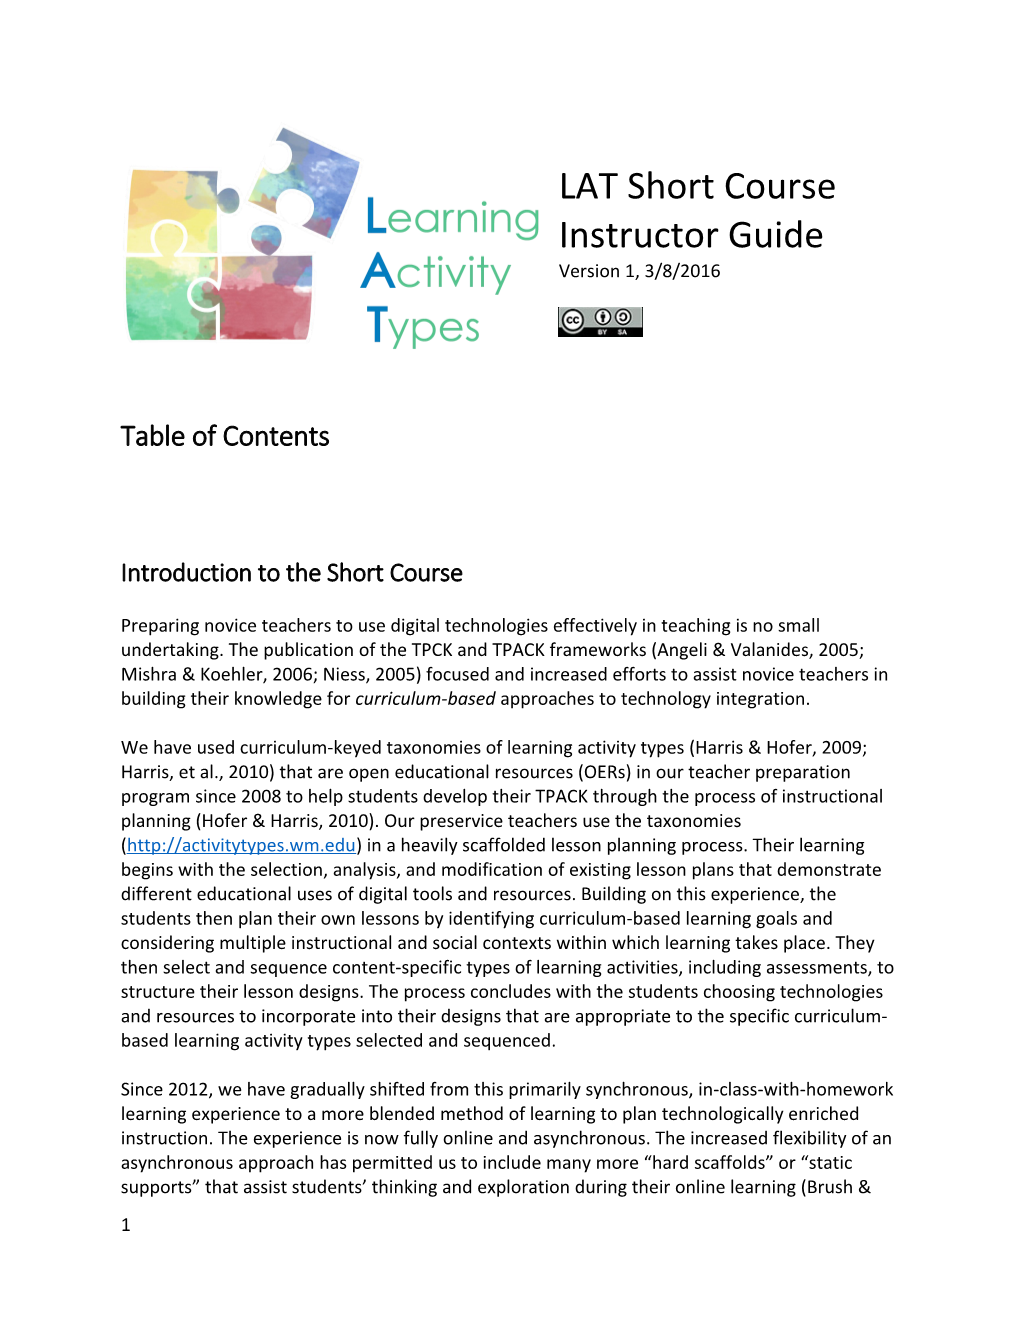 Introduction to the Short Course